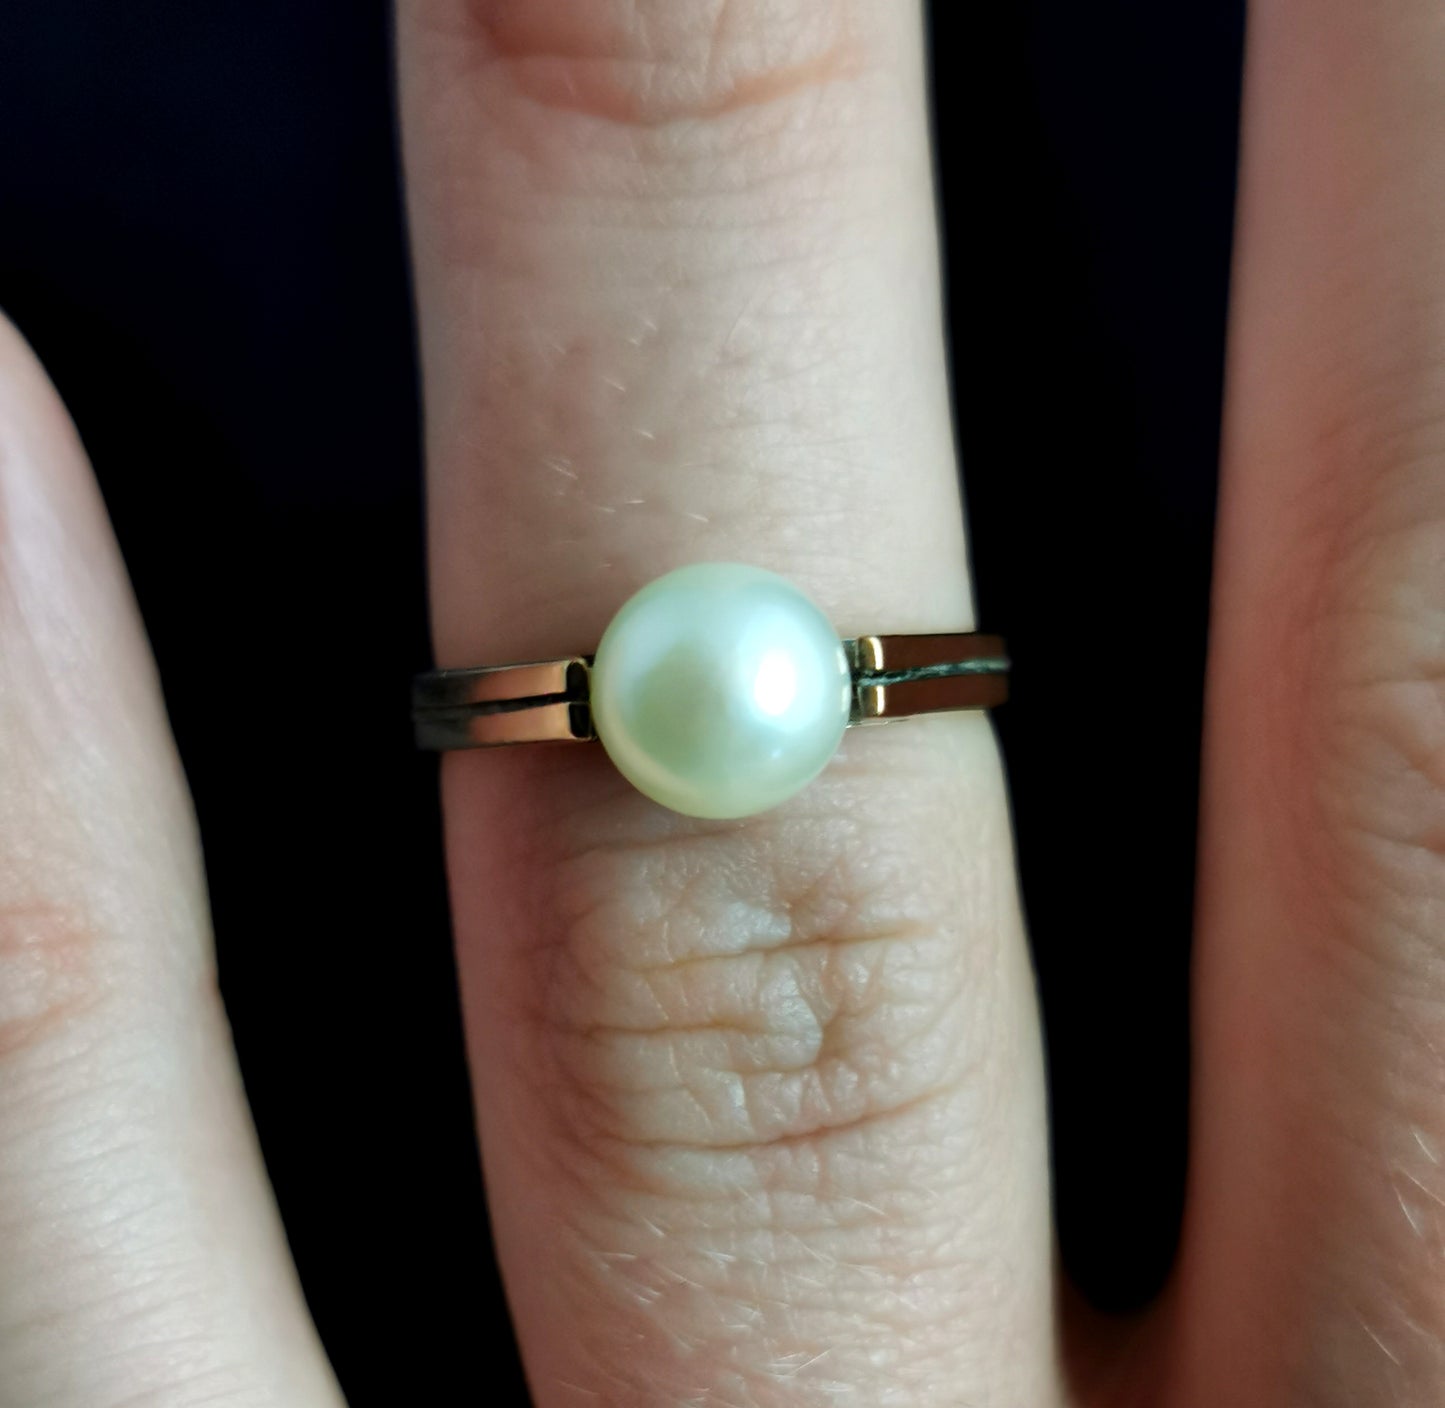 Vintage pearl solitaire ring, 9ct gold, c1940s